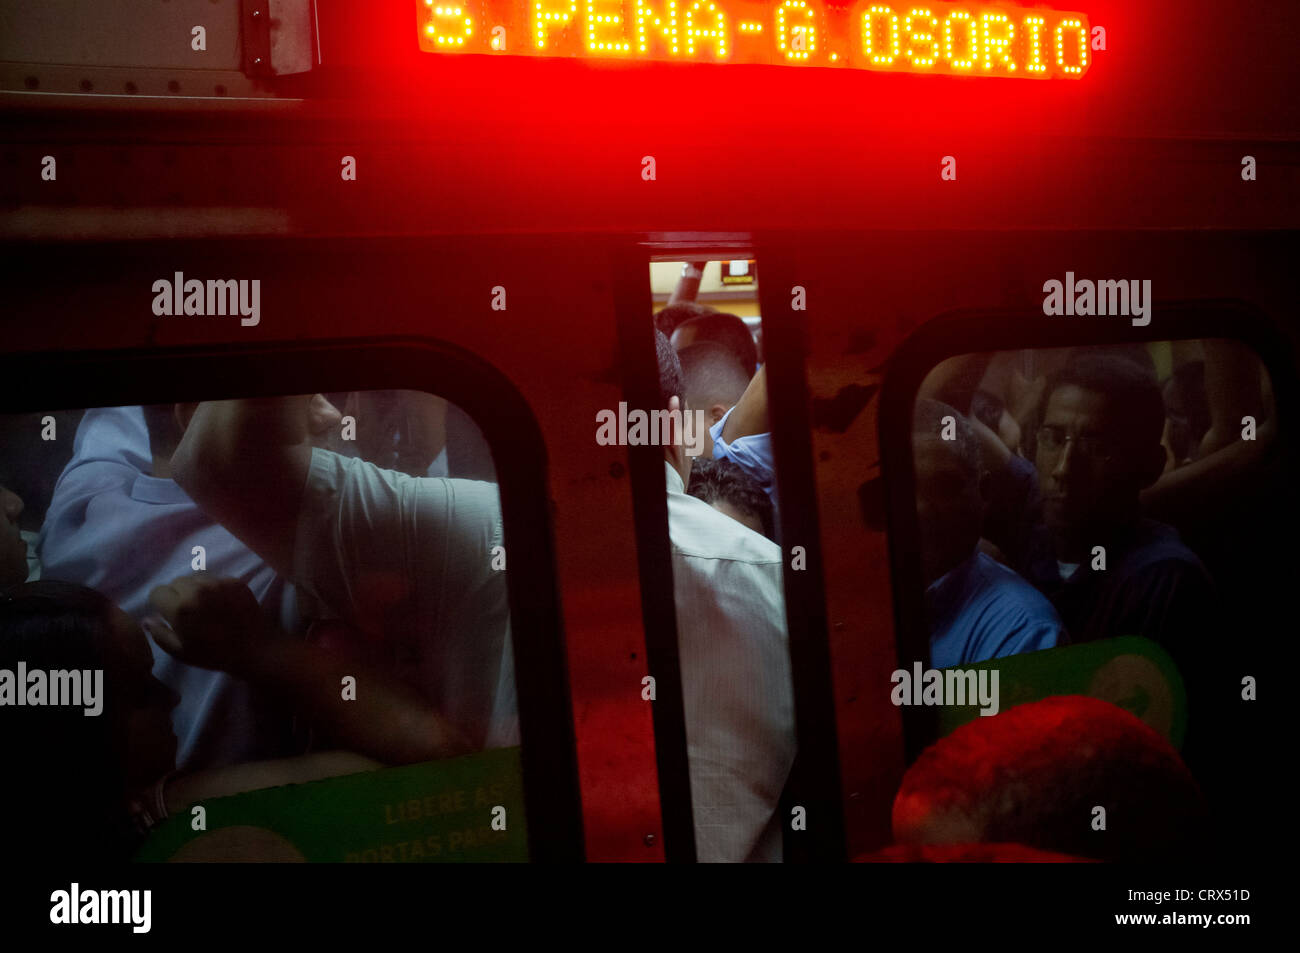 People trying to get into the train at Carioca Station subway in downtown Rio de Janeiro, Brazil Train door closing Stock Photo